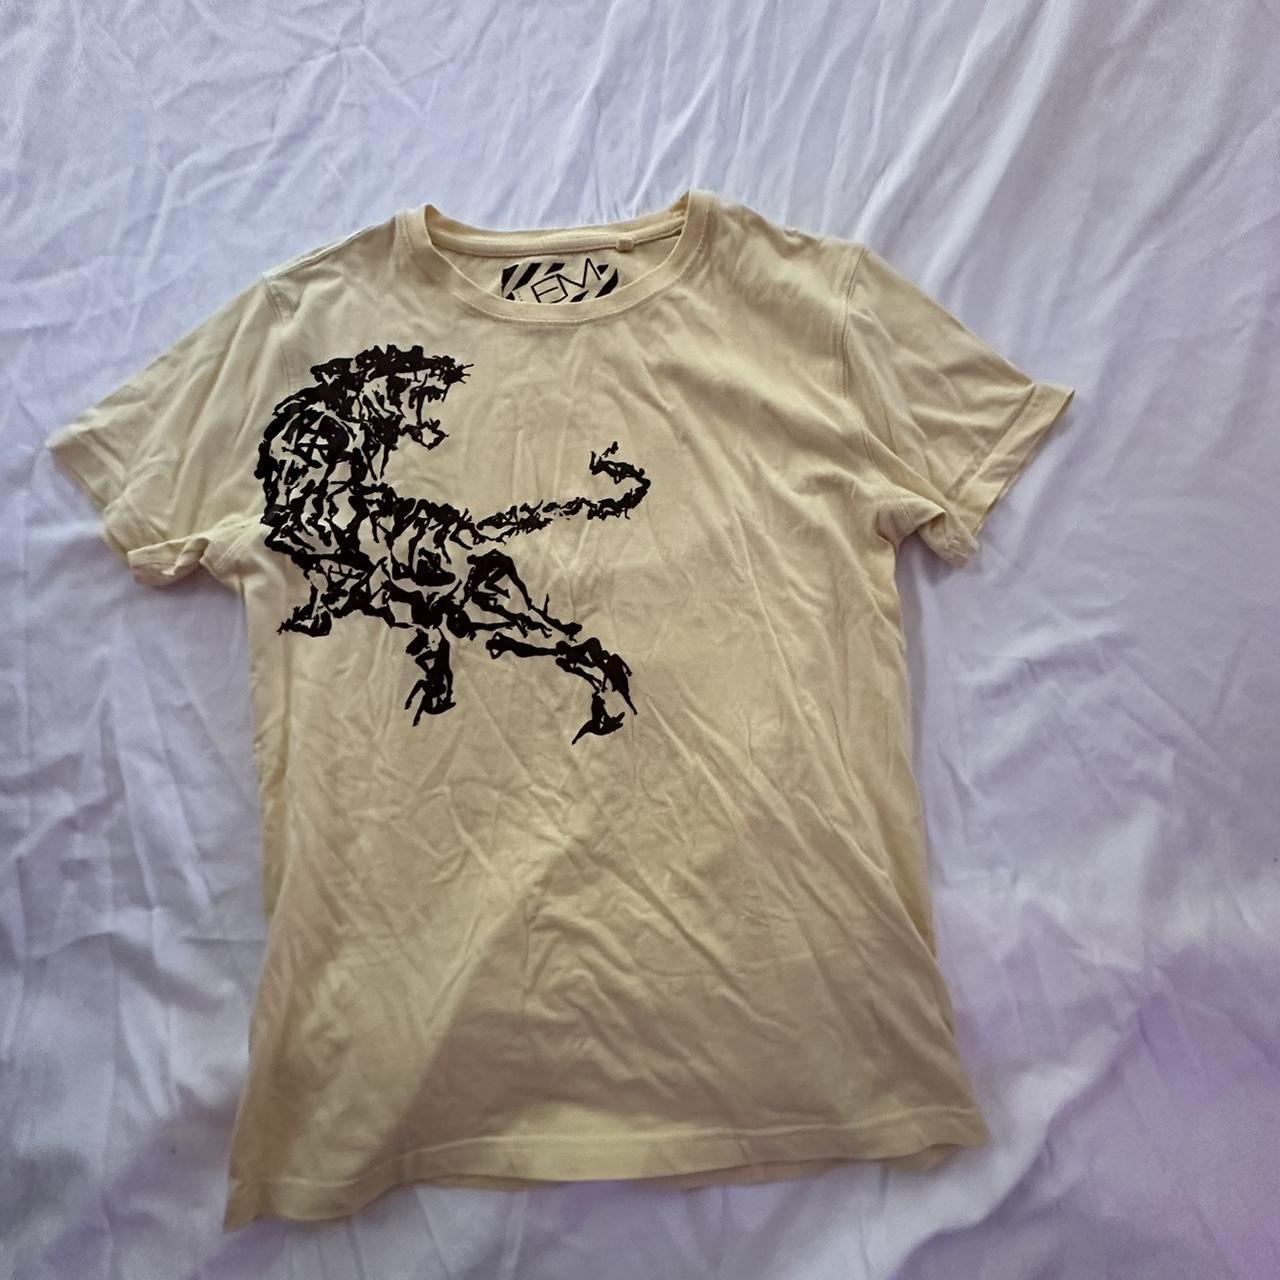 1 of 1 hand made vintage tee. Made my self a while ago - Depop